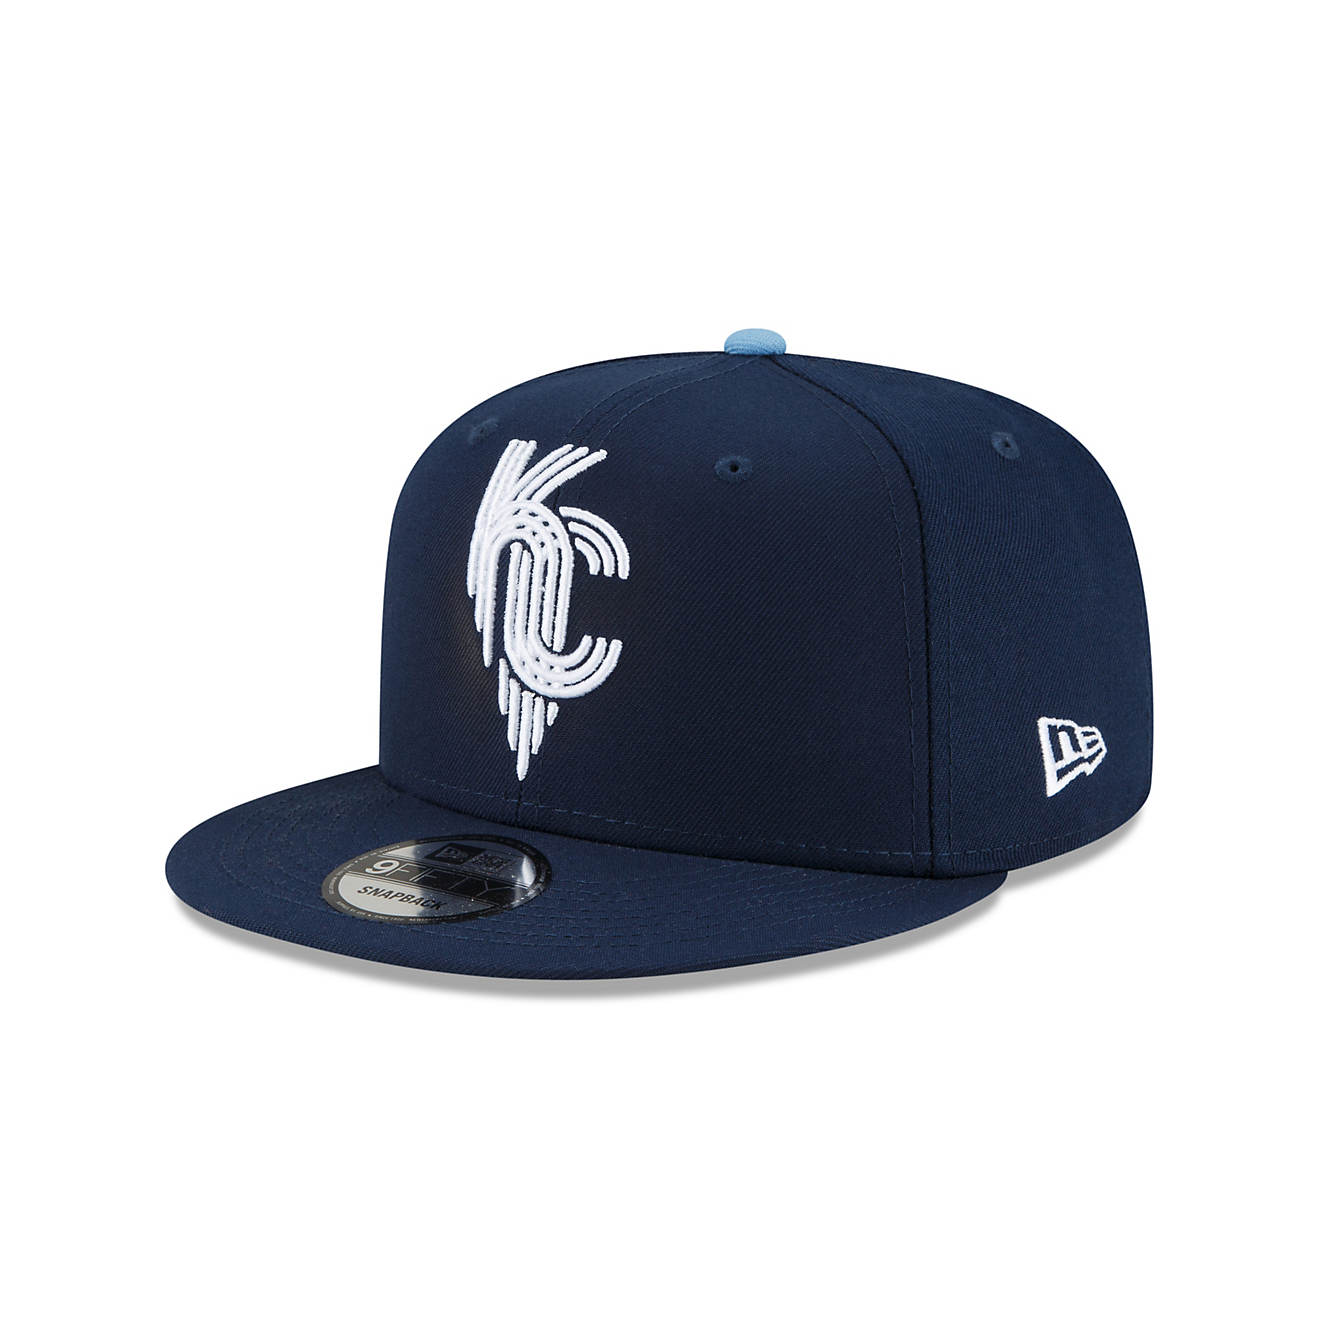 New Era Youth Kansas City Royals City Connect 9FIFTY Cap                                                                         - view number 1